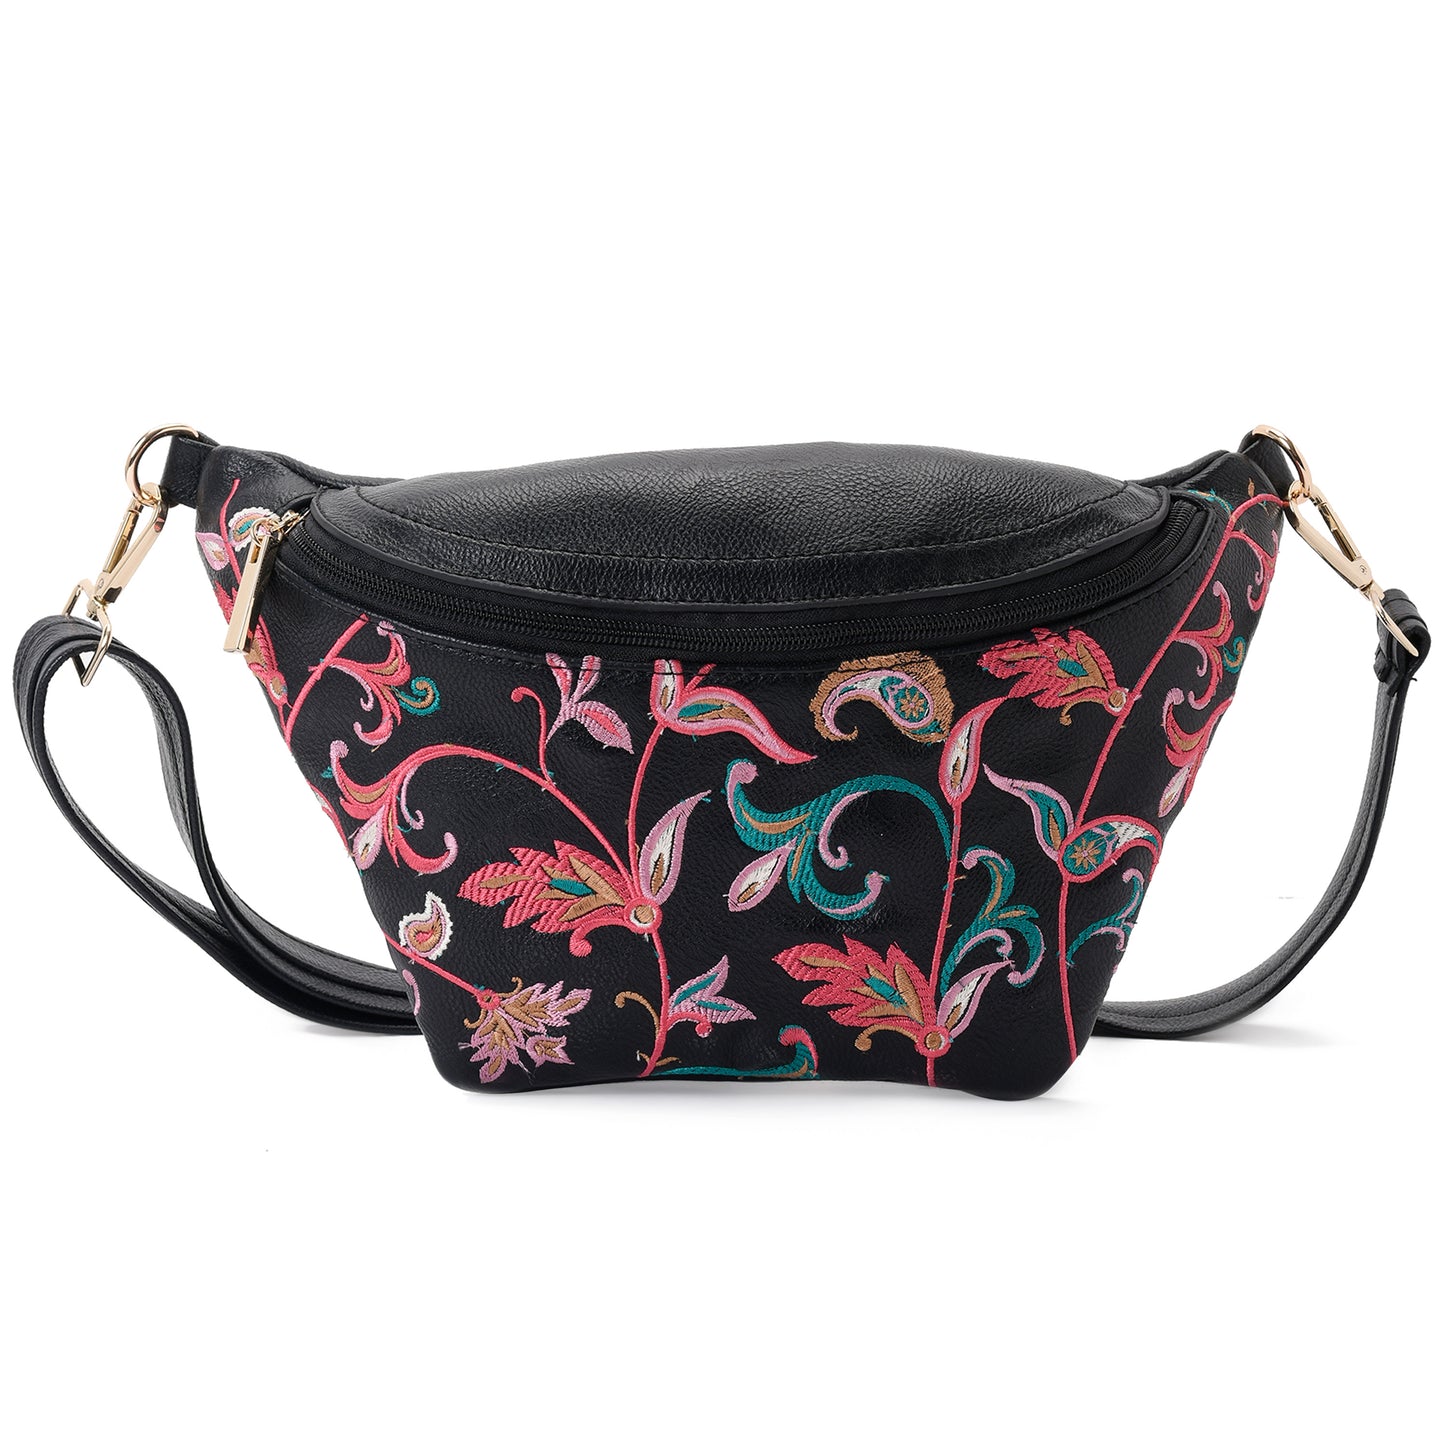 Fanny pack Black with colorful Flowers